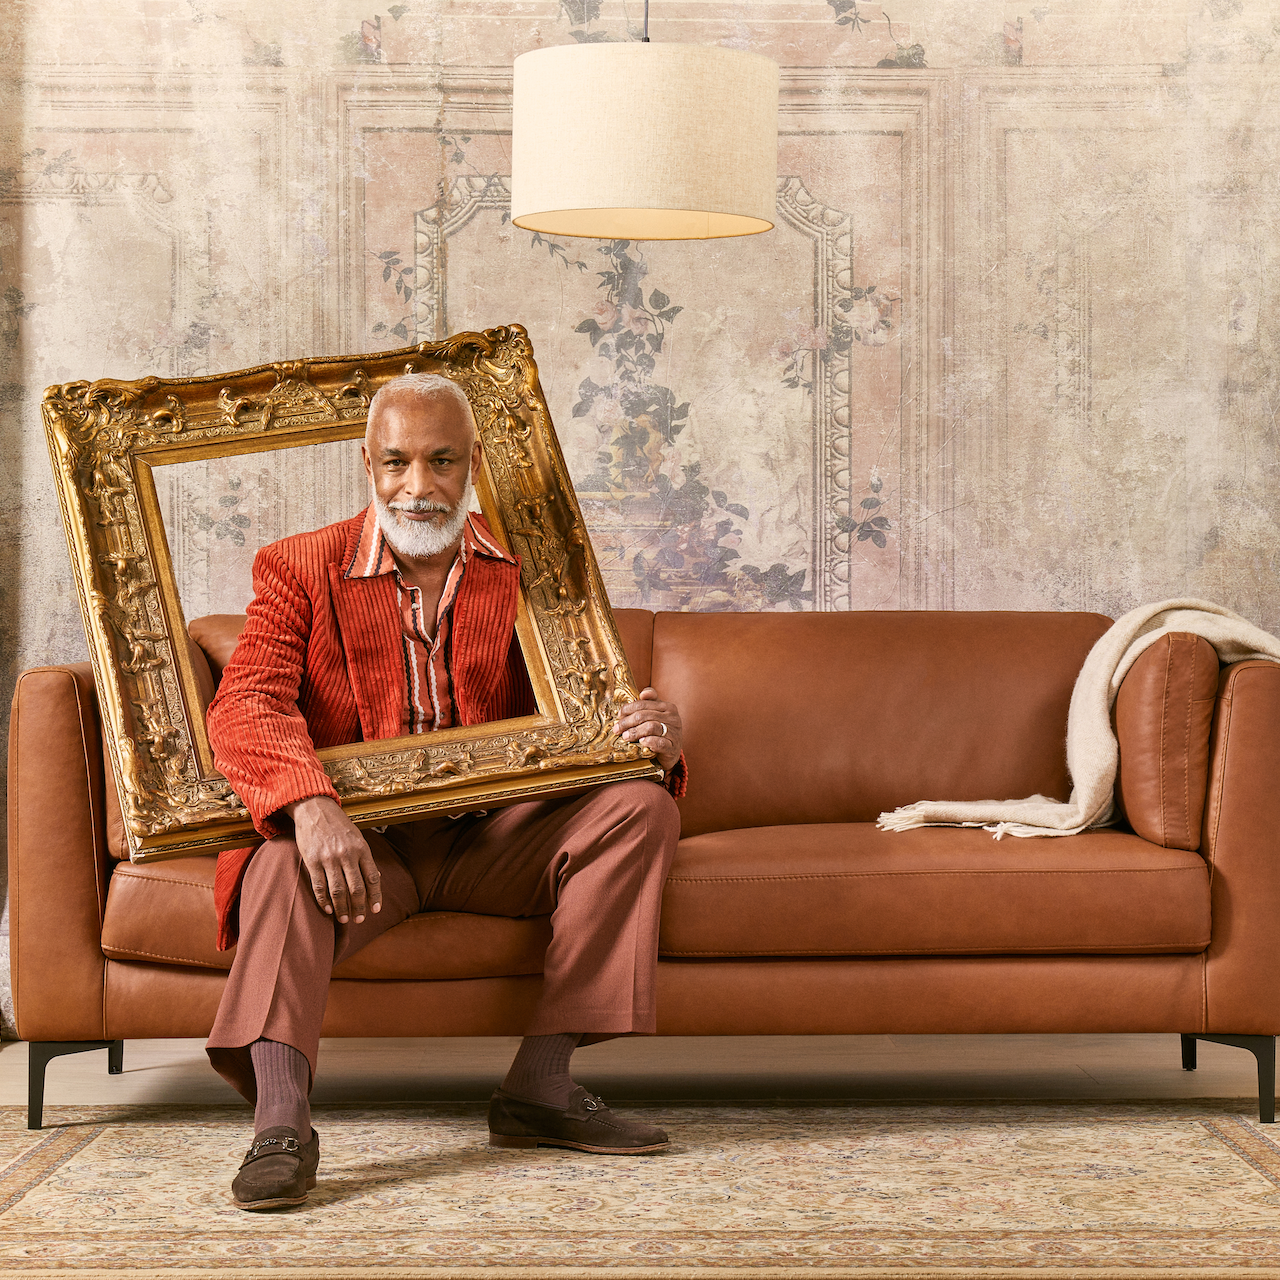 A stylish man relaxes on a luxurious leather sofa, holding a beautiful frame with care.